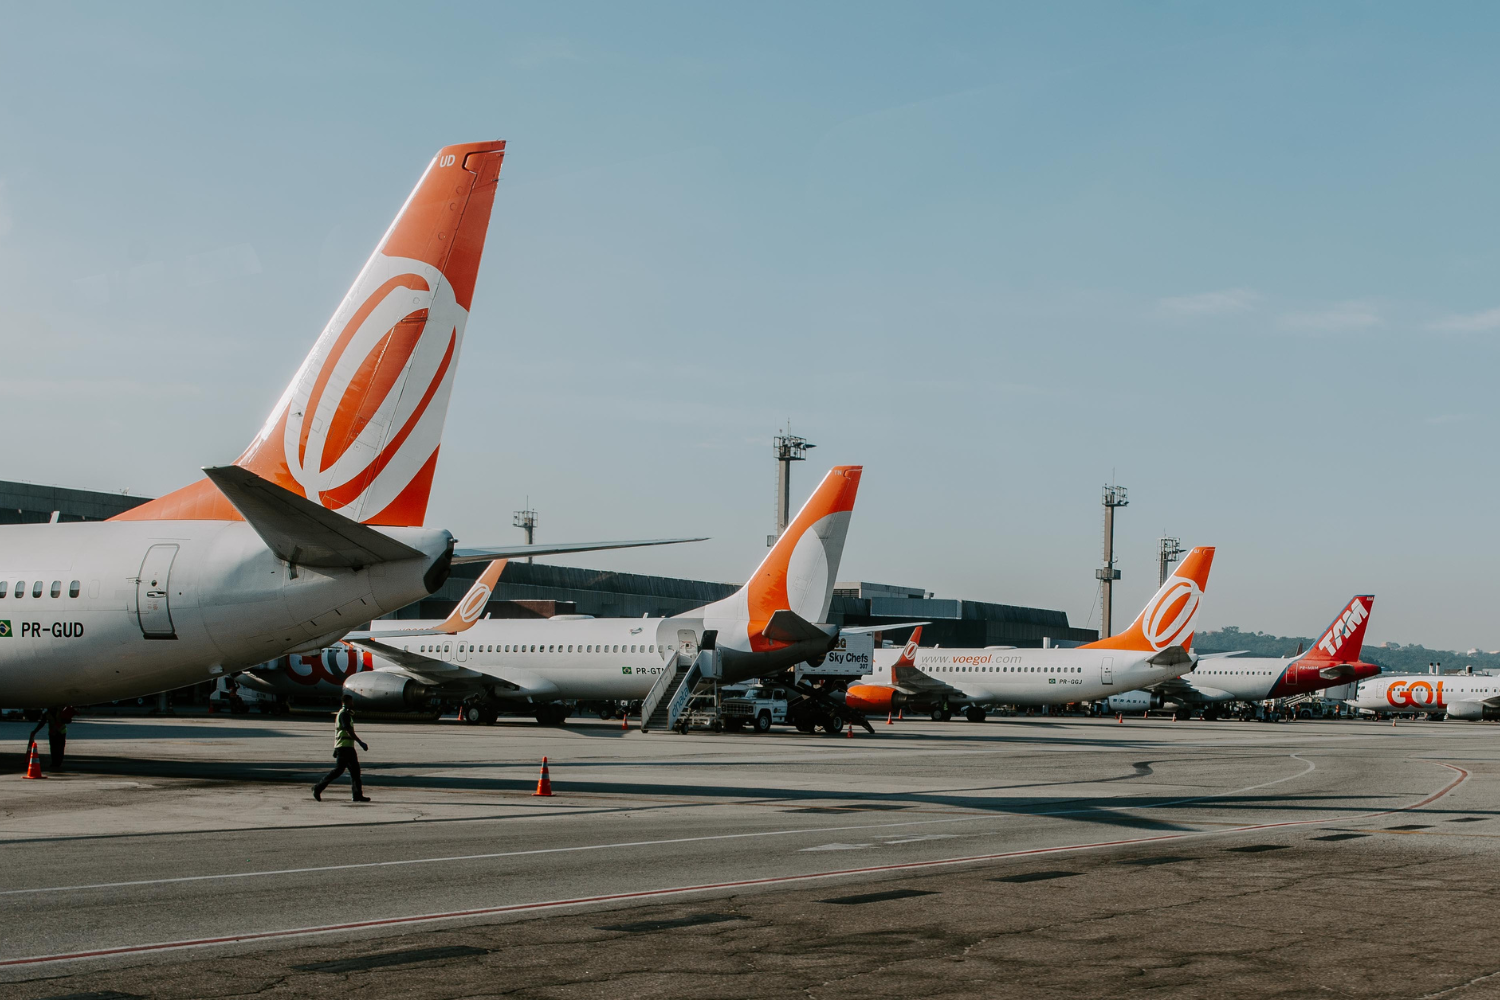 EMMA Systems signs a partnership agreement with Colombian airport consultancy SCADIA Consultores to expand its offering to Spanish-speaking airports.